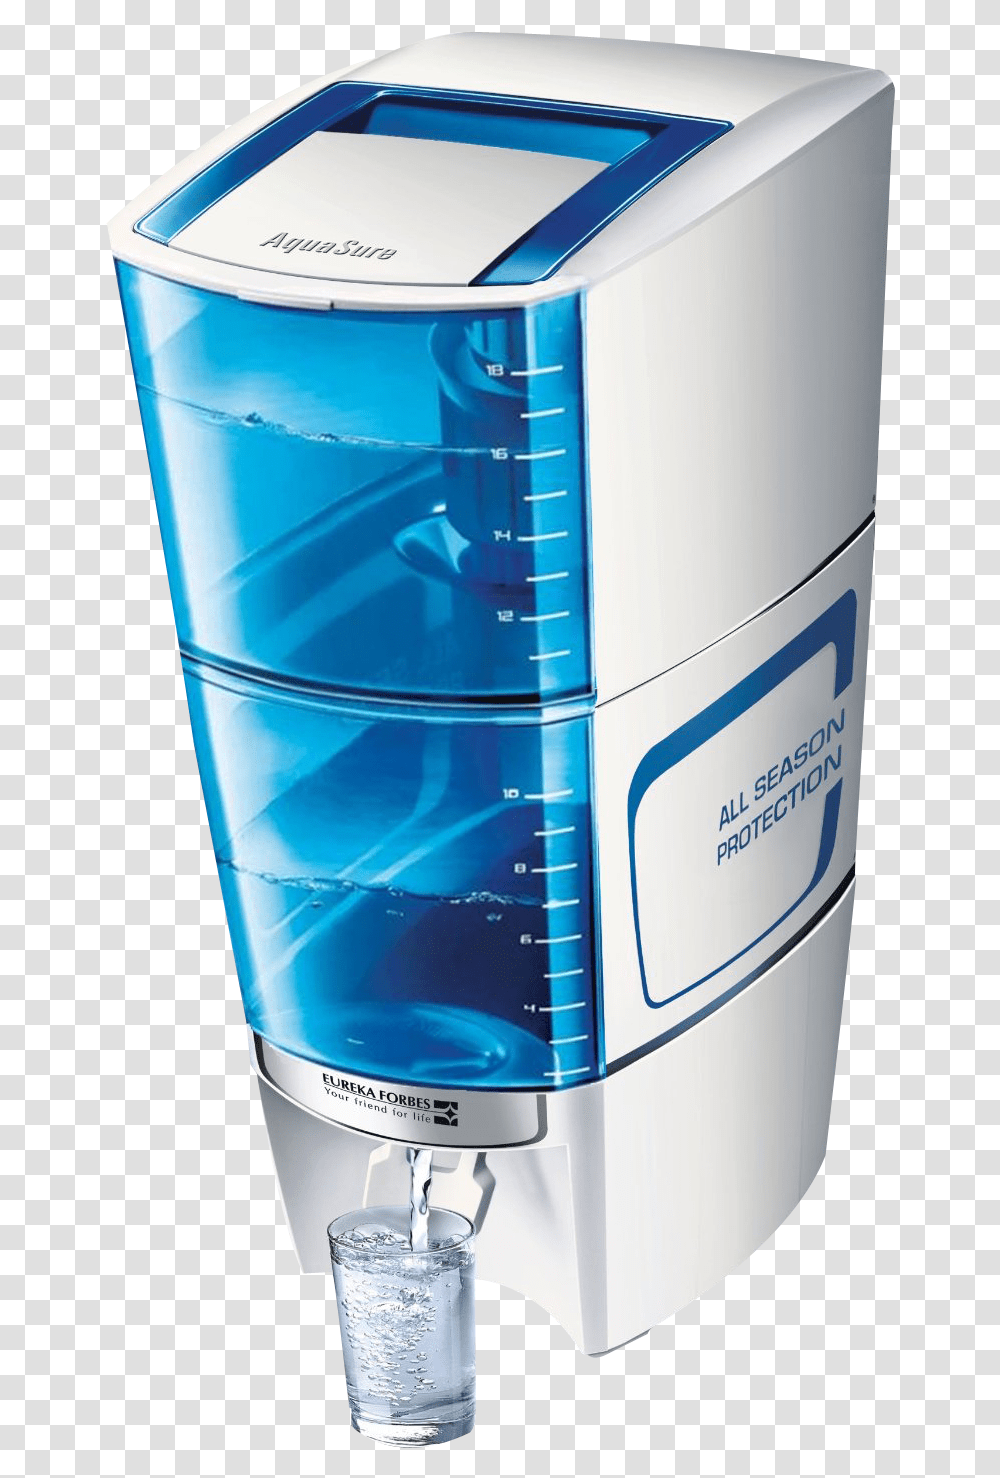 Water Purifier With Glass Image Pngpix Eureka Forbes Water Purifier Amrit, Bottle, Cup, Mixer, Appliance Transparent Png